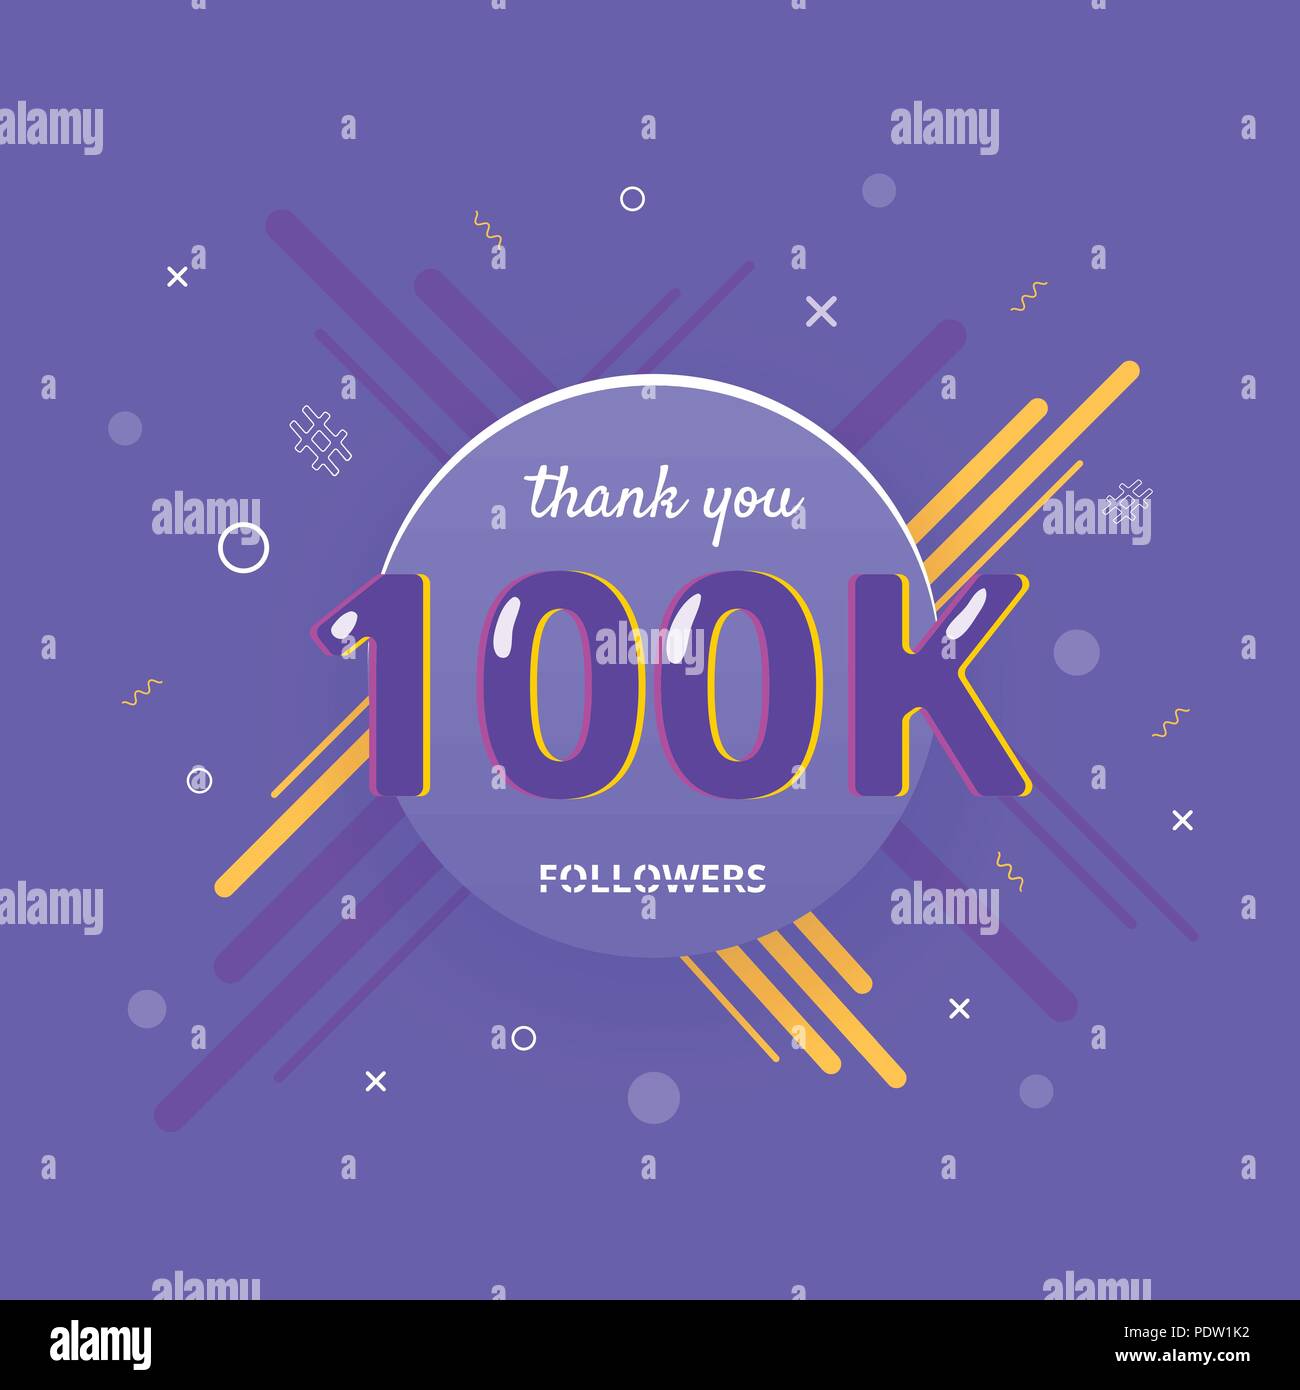 100,000 Embellishments Vector Images